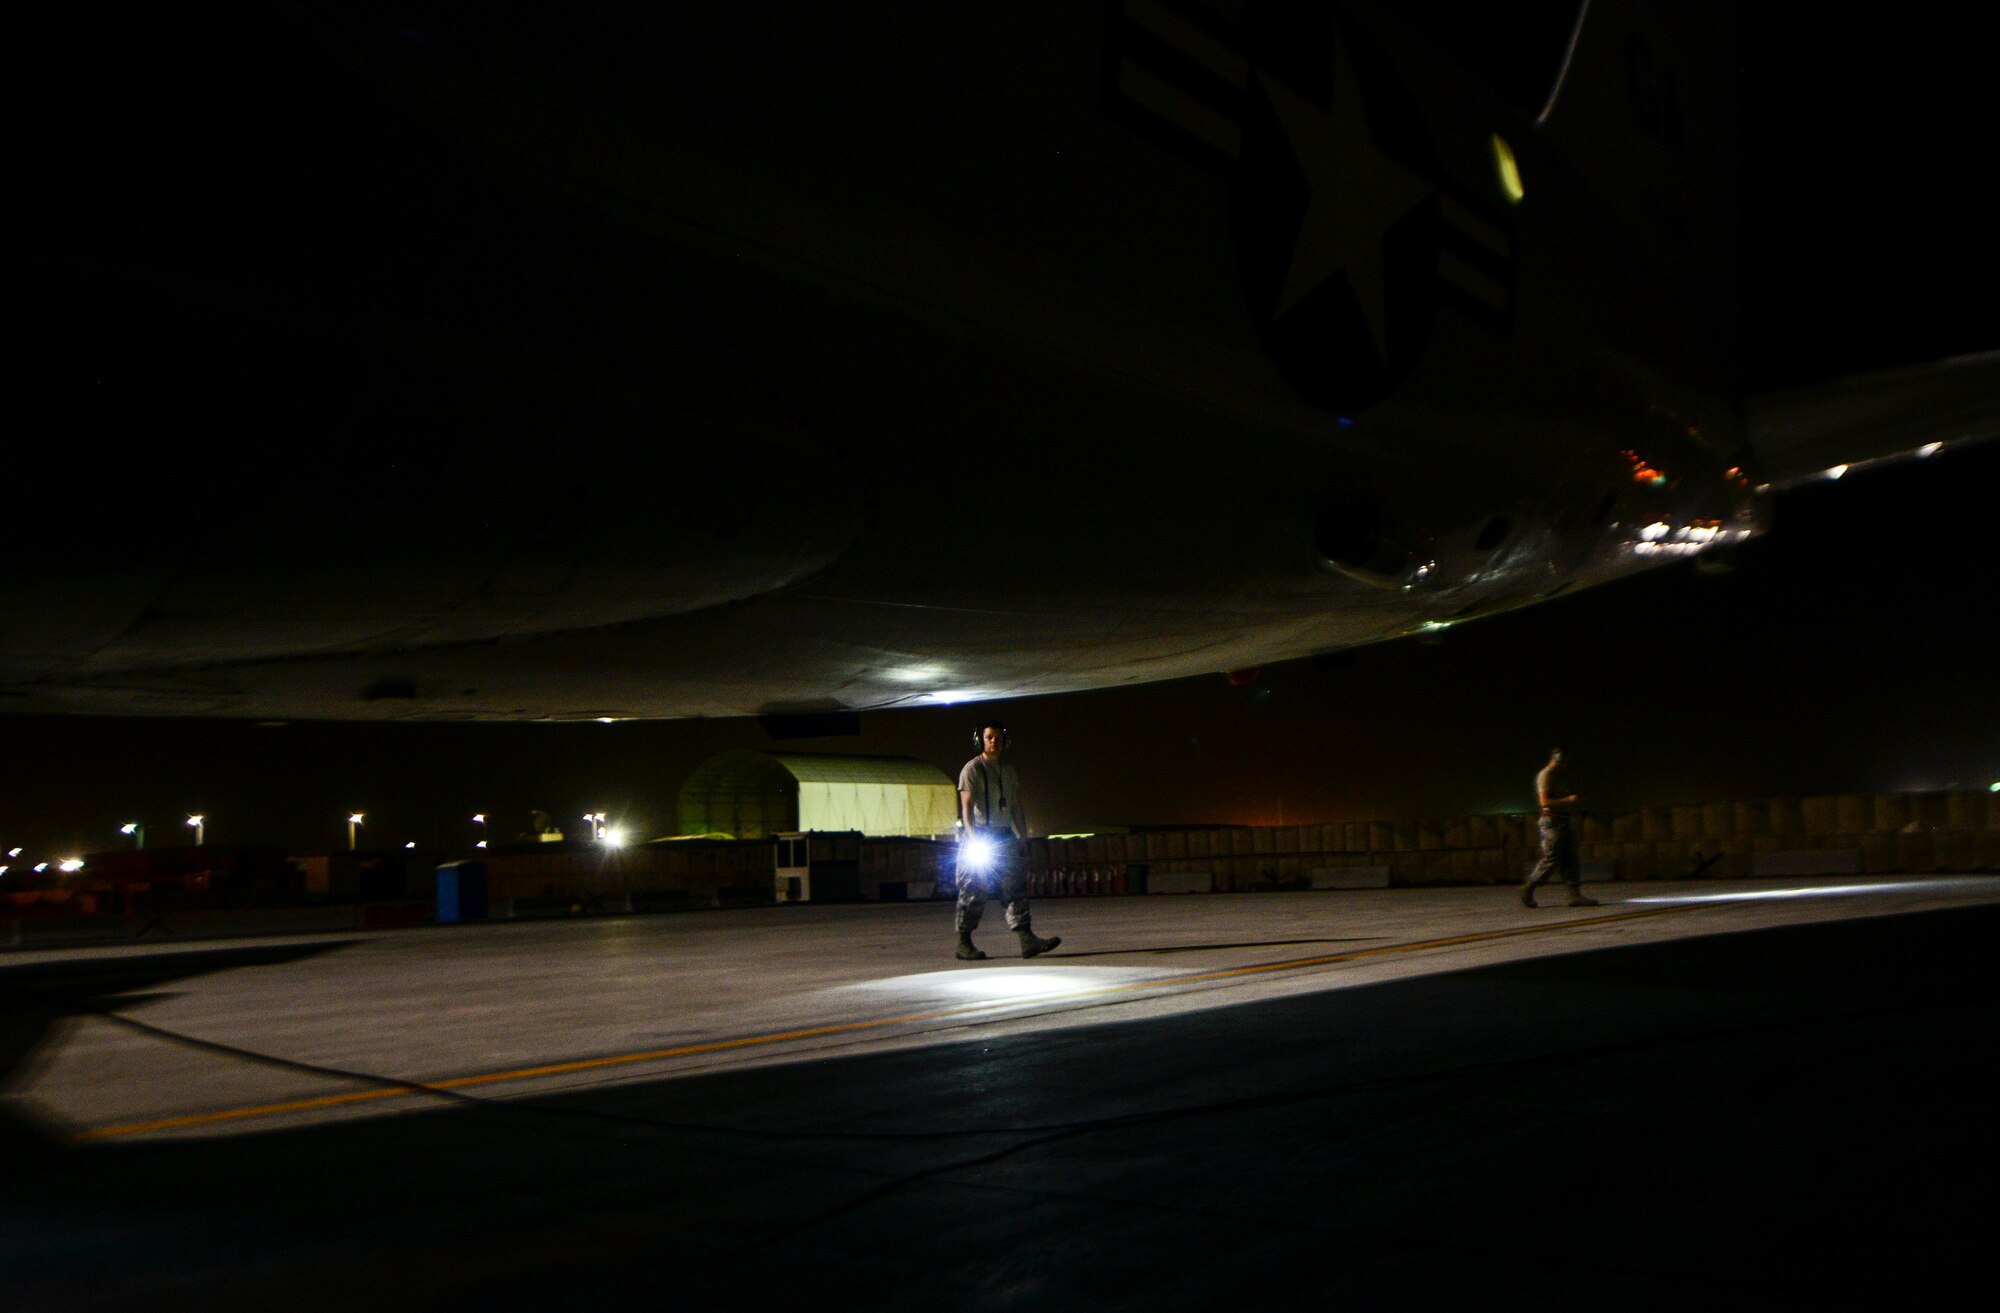 Crew chiefs from the 7th Expeditionary Air Mobility Unit perform a foreign object damage walk prior to the aircraft taxiing in the runway June 8, 2016, at Al Udeid Air Base, Qatar. FOD, or foreign object damage, is a hazard for aircraft and other precision equipment. Suction caused by the air intake of jet engines can pull FOD into the aircraft and cause damage to the high-precision engines and other systems in the aircraft. FOD walks are performed to eliminate danger and problems to the aircraft taxiing down the runway. (U.S. Air Force photo/Senior Airman Janelle Patiño/Released)